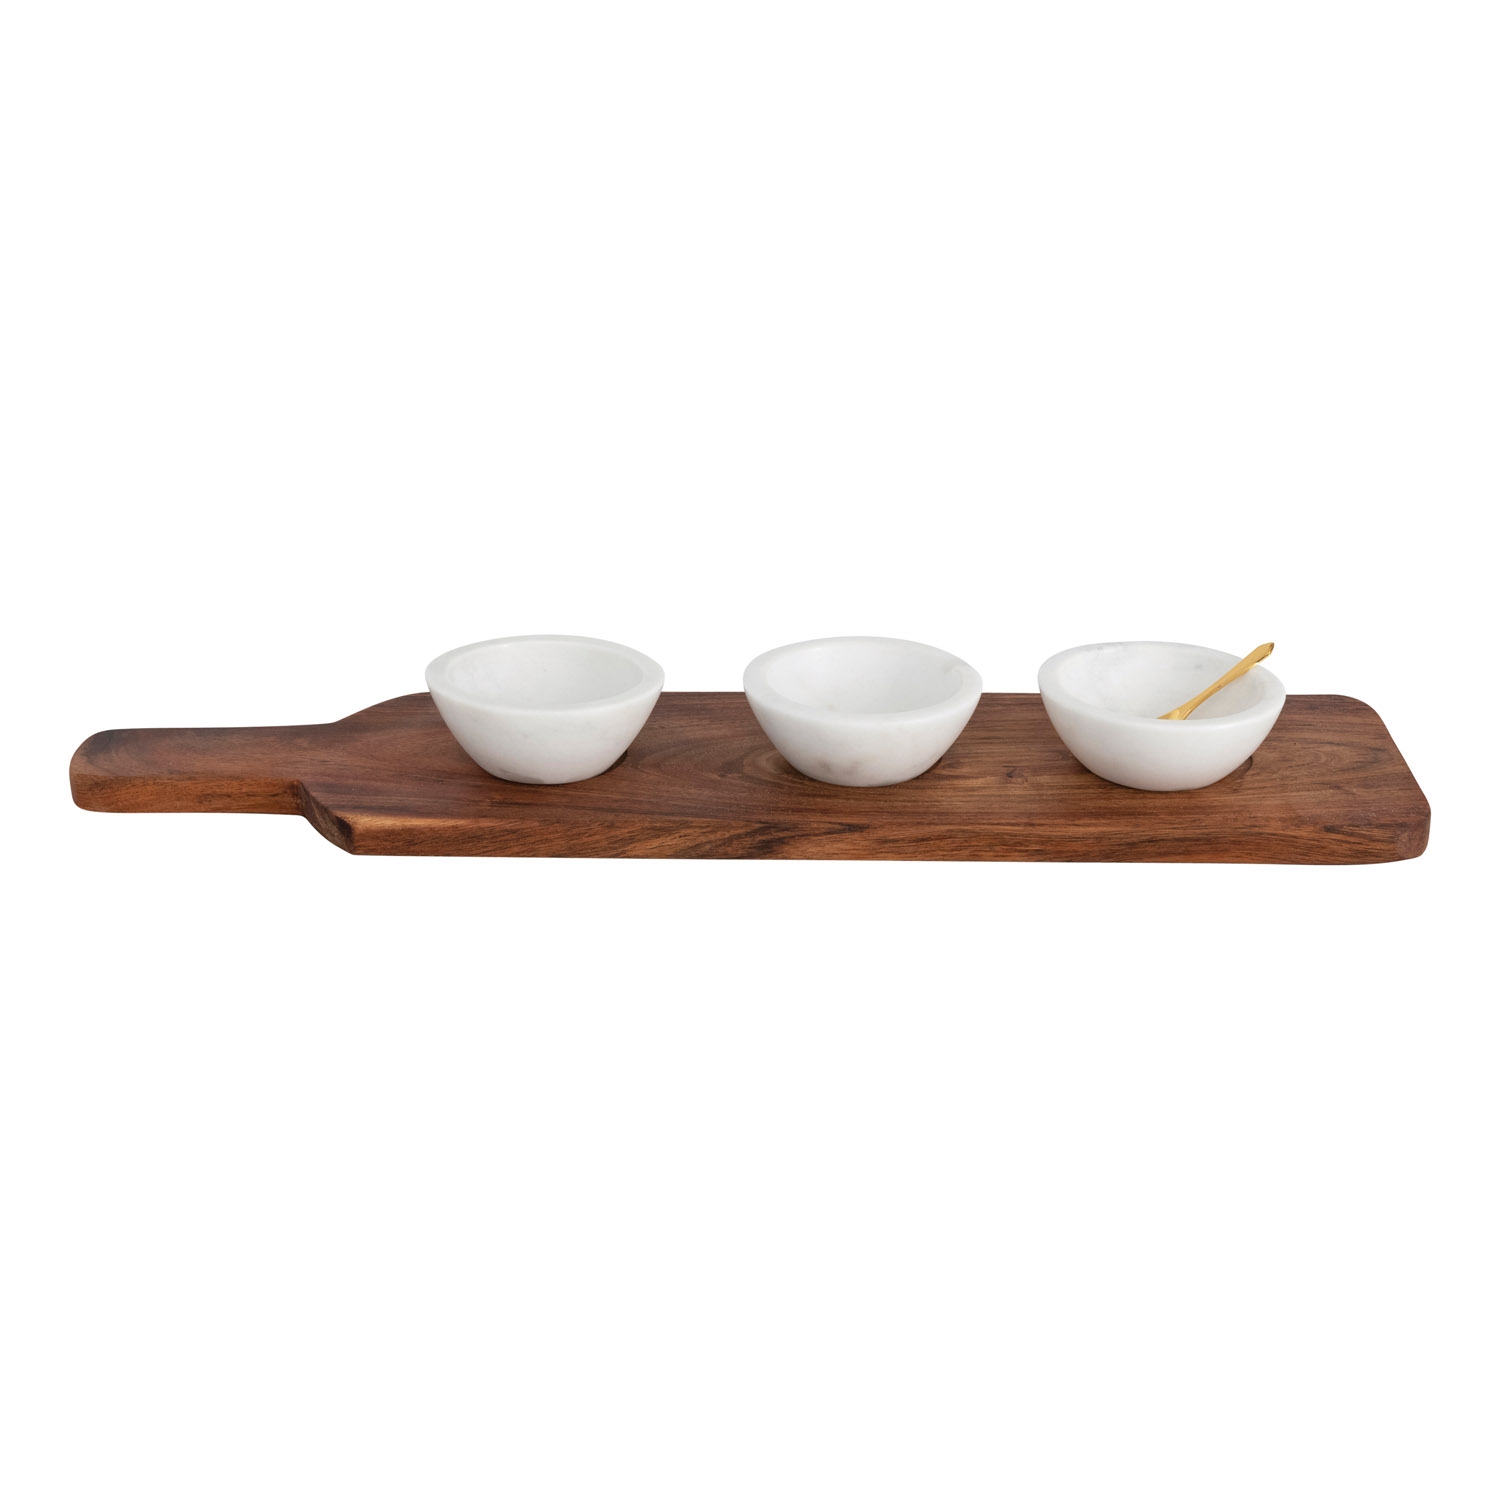 Marble Bowls on Acacia Wood Tray with Stainless Steel Spoon (Set of 5 Pieces) - Image 0